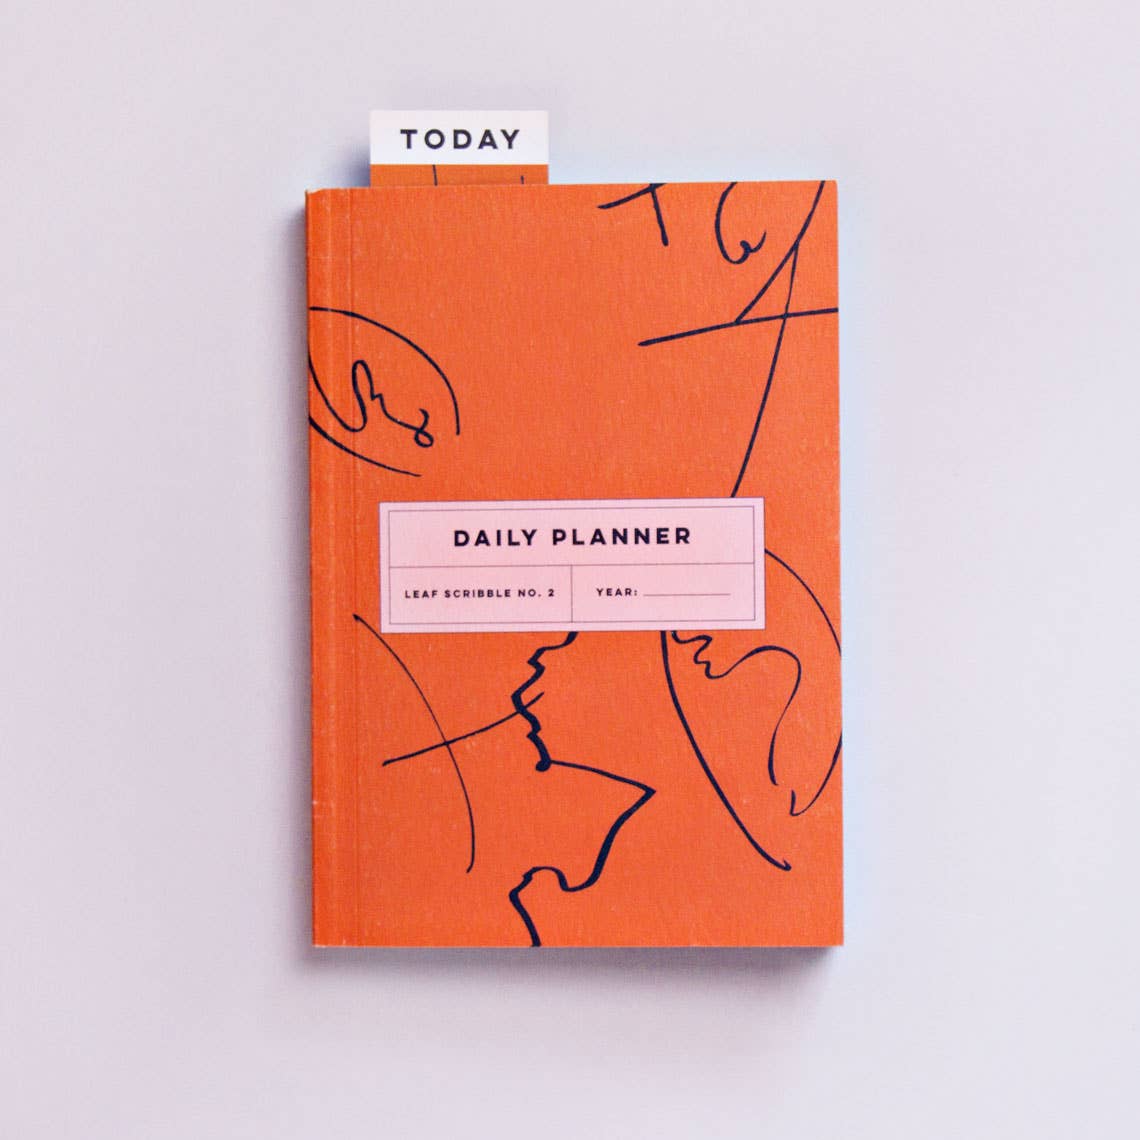 Leaf Scribble No.1 Daily Planner Book